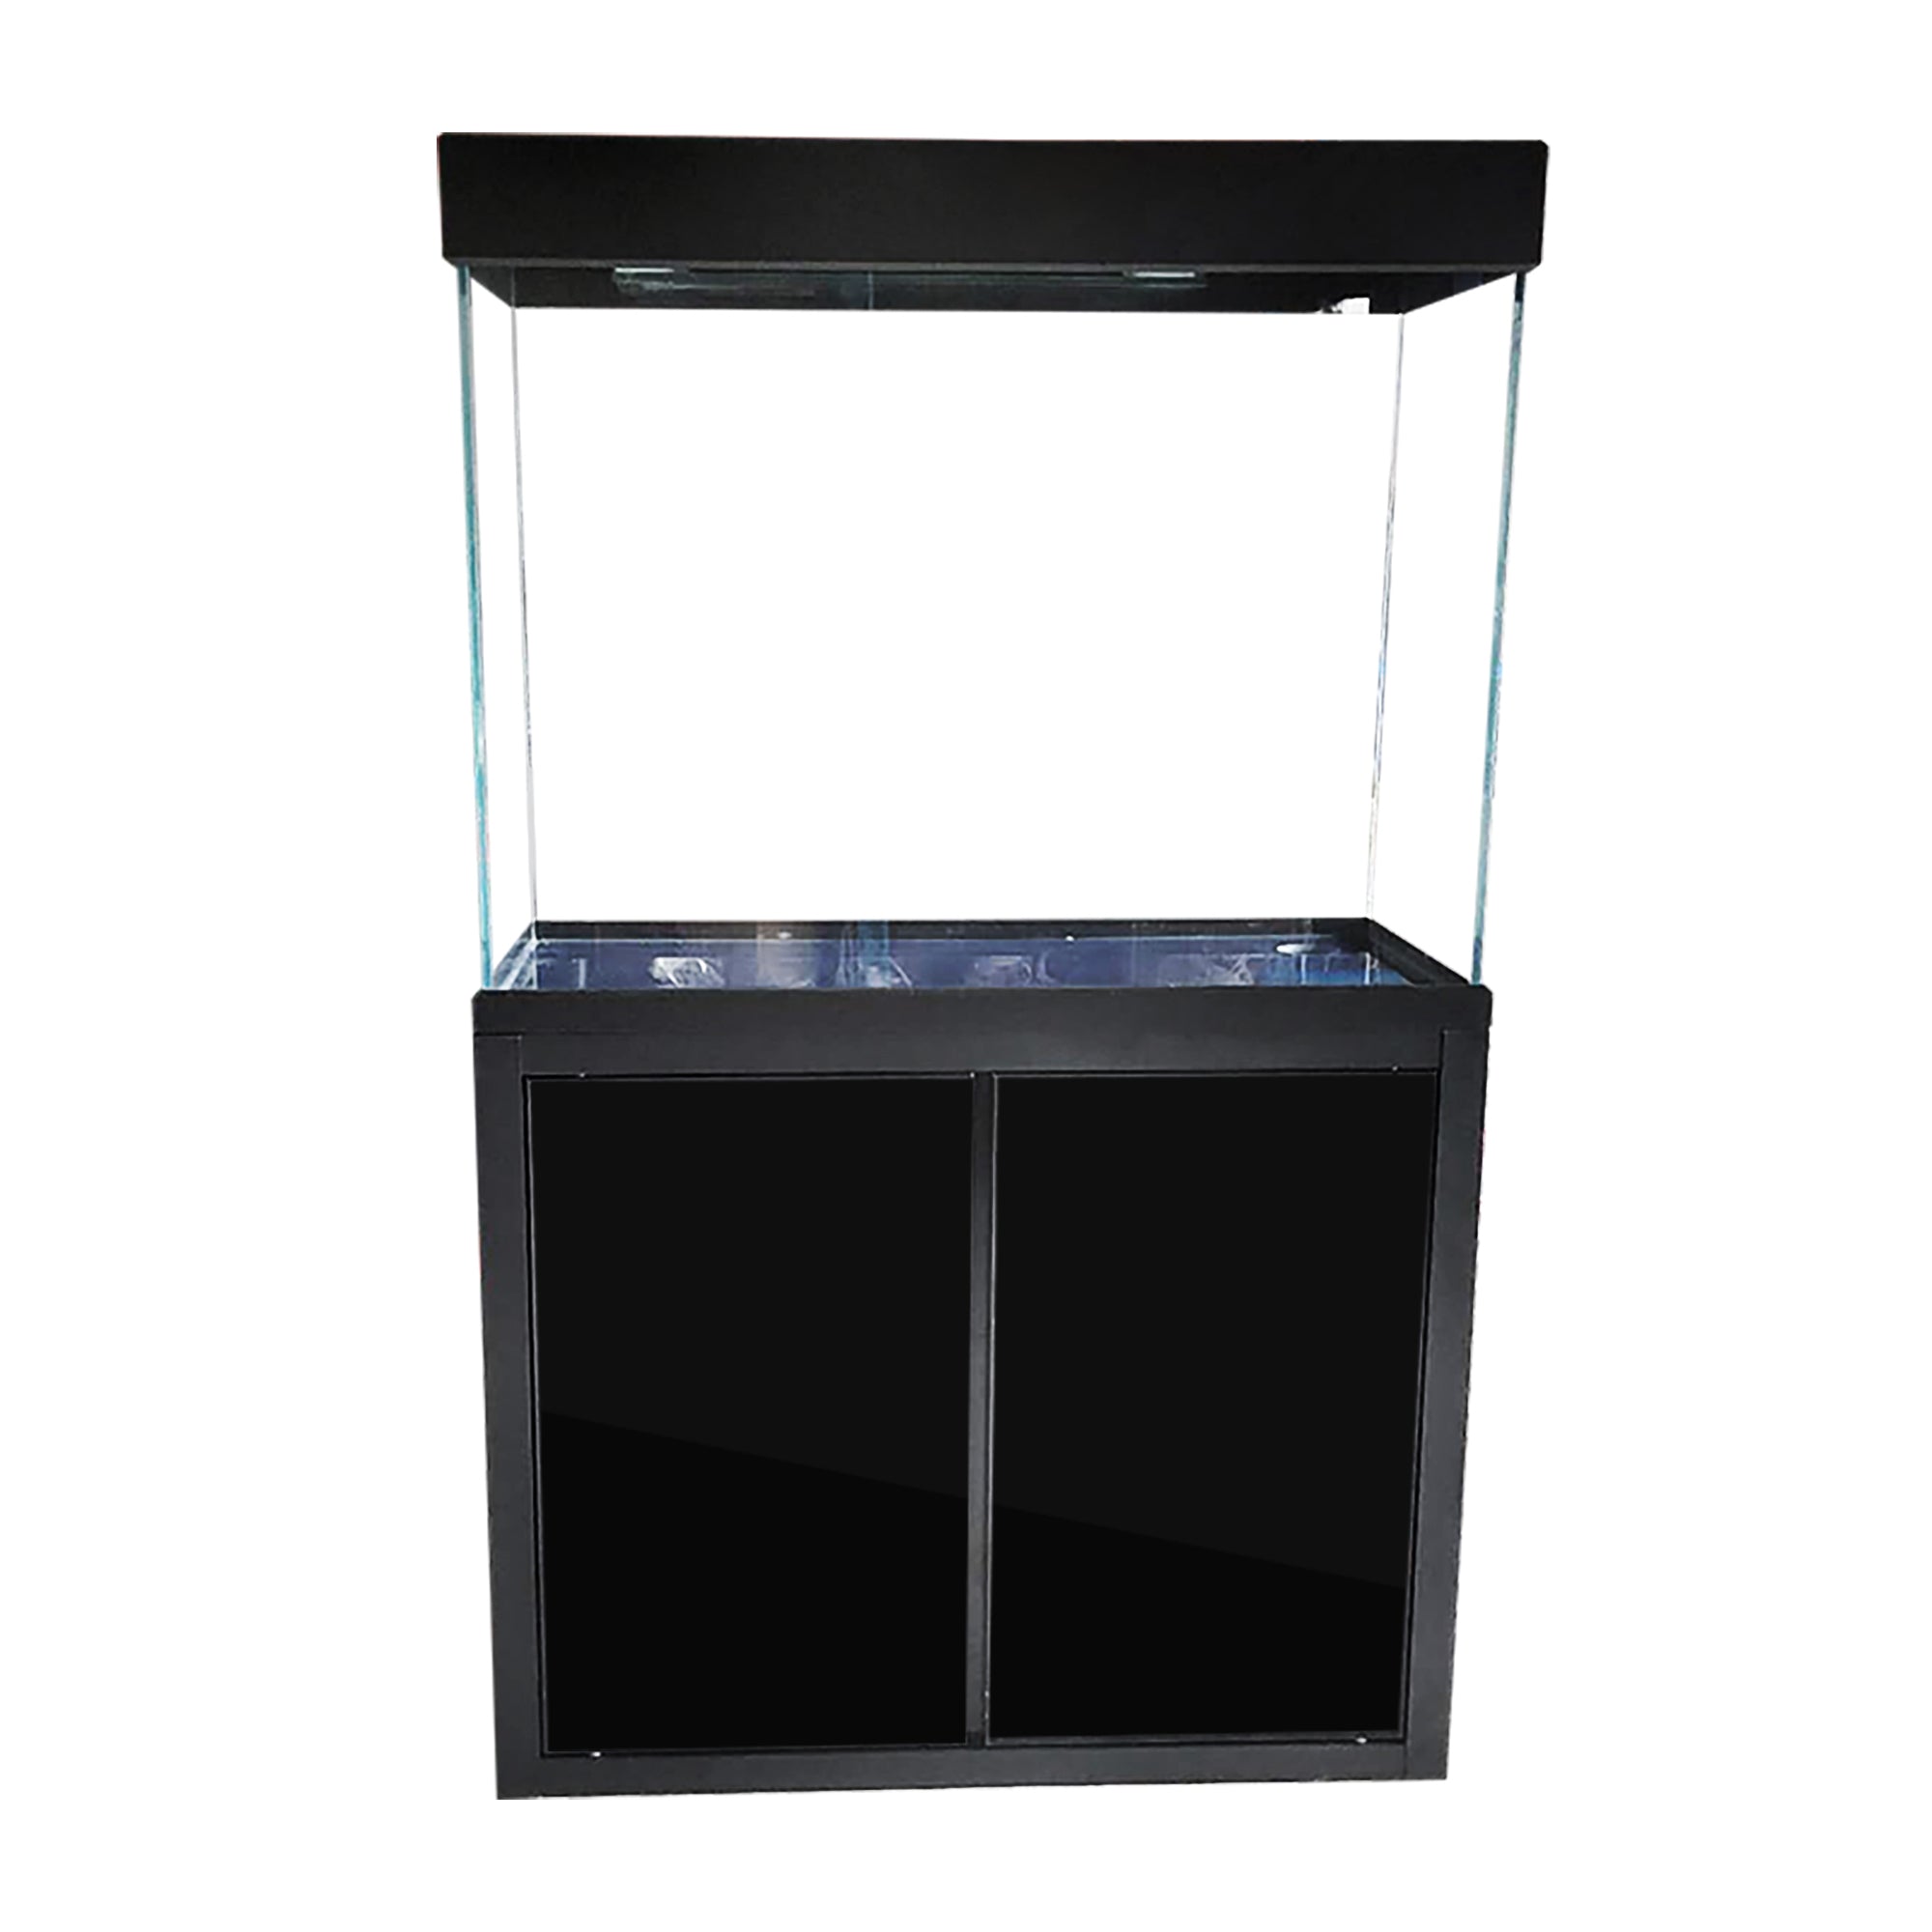 Order GLASS FISH TANKS (Size In INCHES) Online From J.A.D AQUATICS